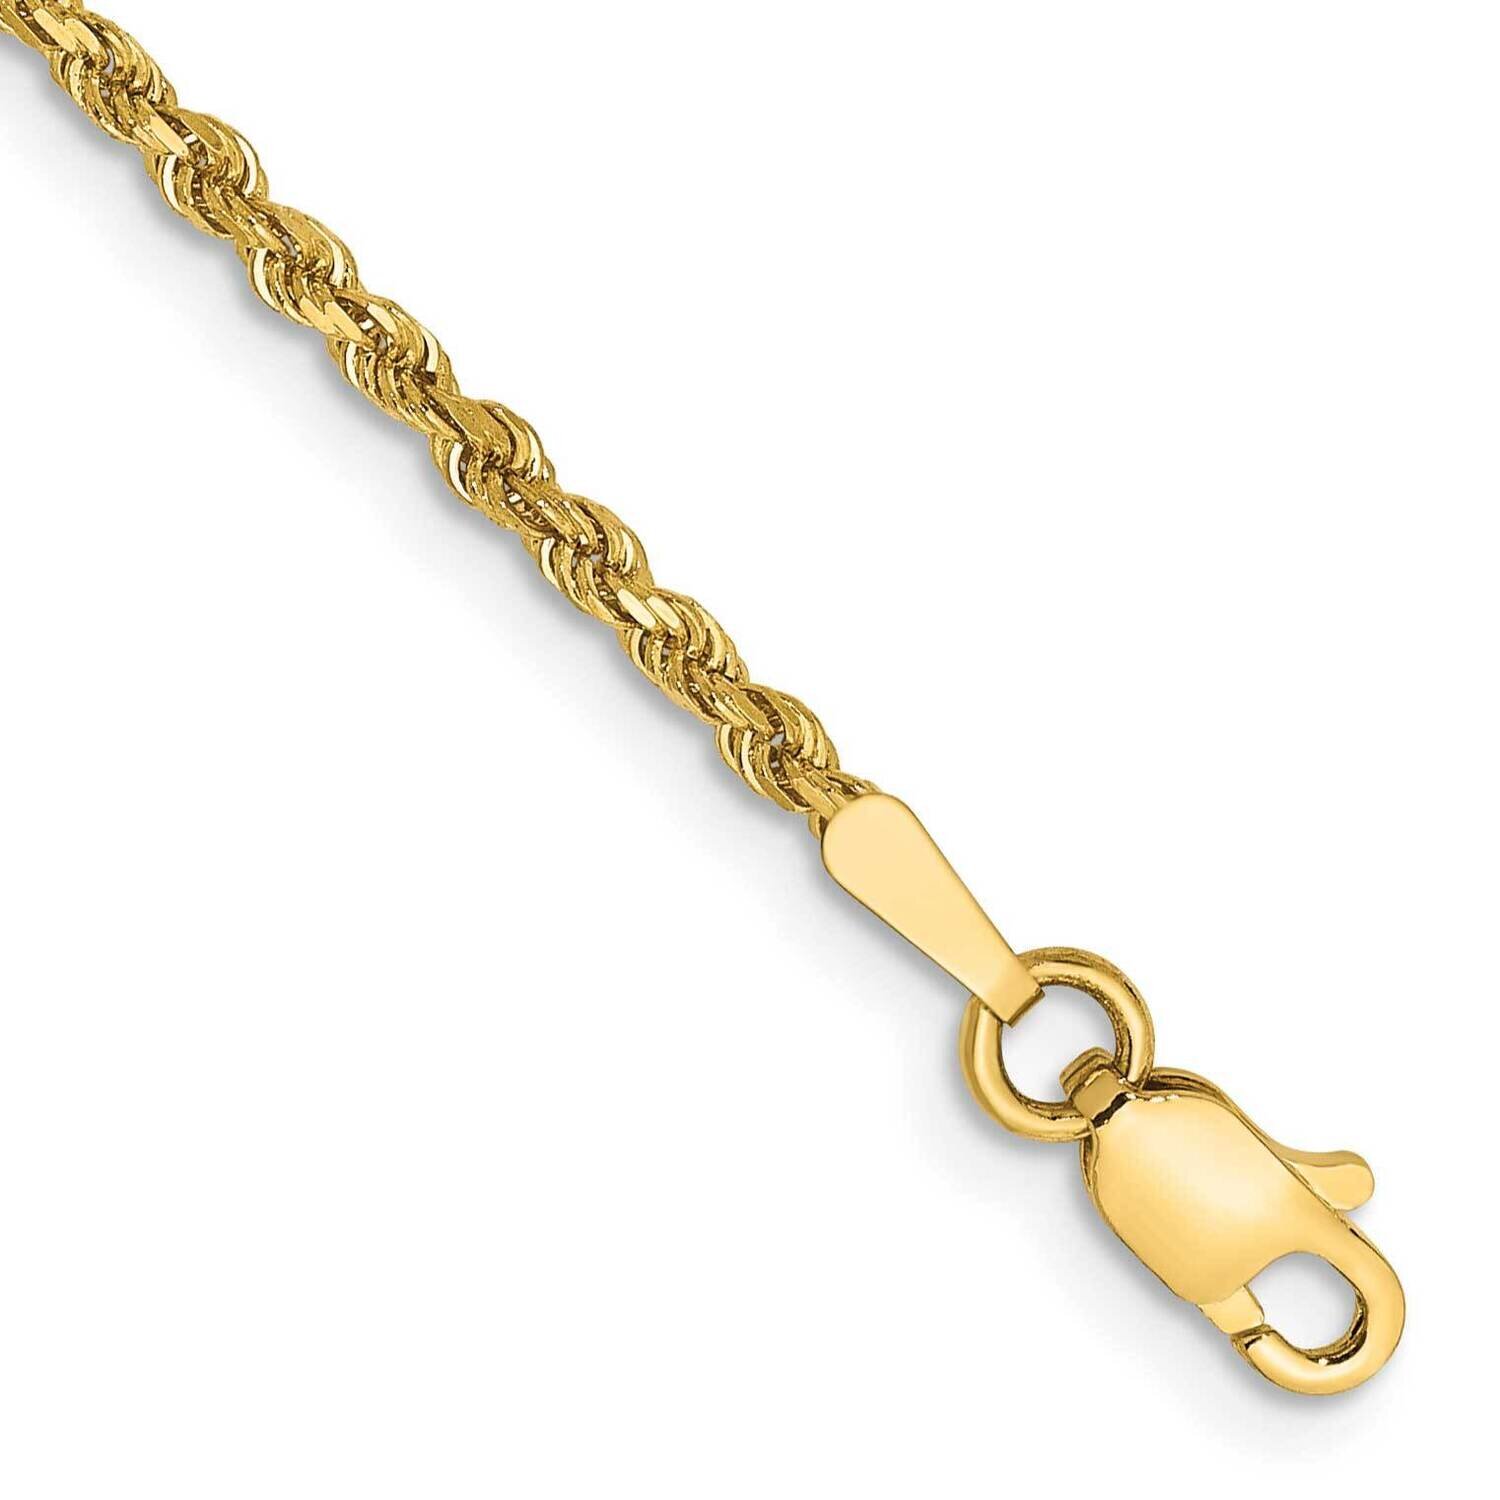 5.5 Inch 1.75mm Diamond-Cut Rope with Lobster Clasp Chain 14k Gold 014L-5.5